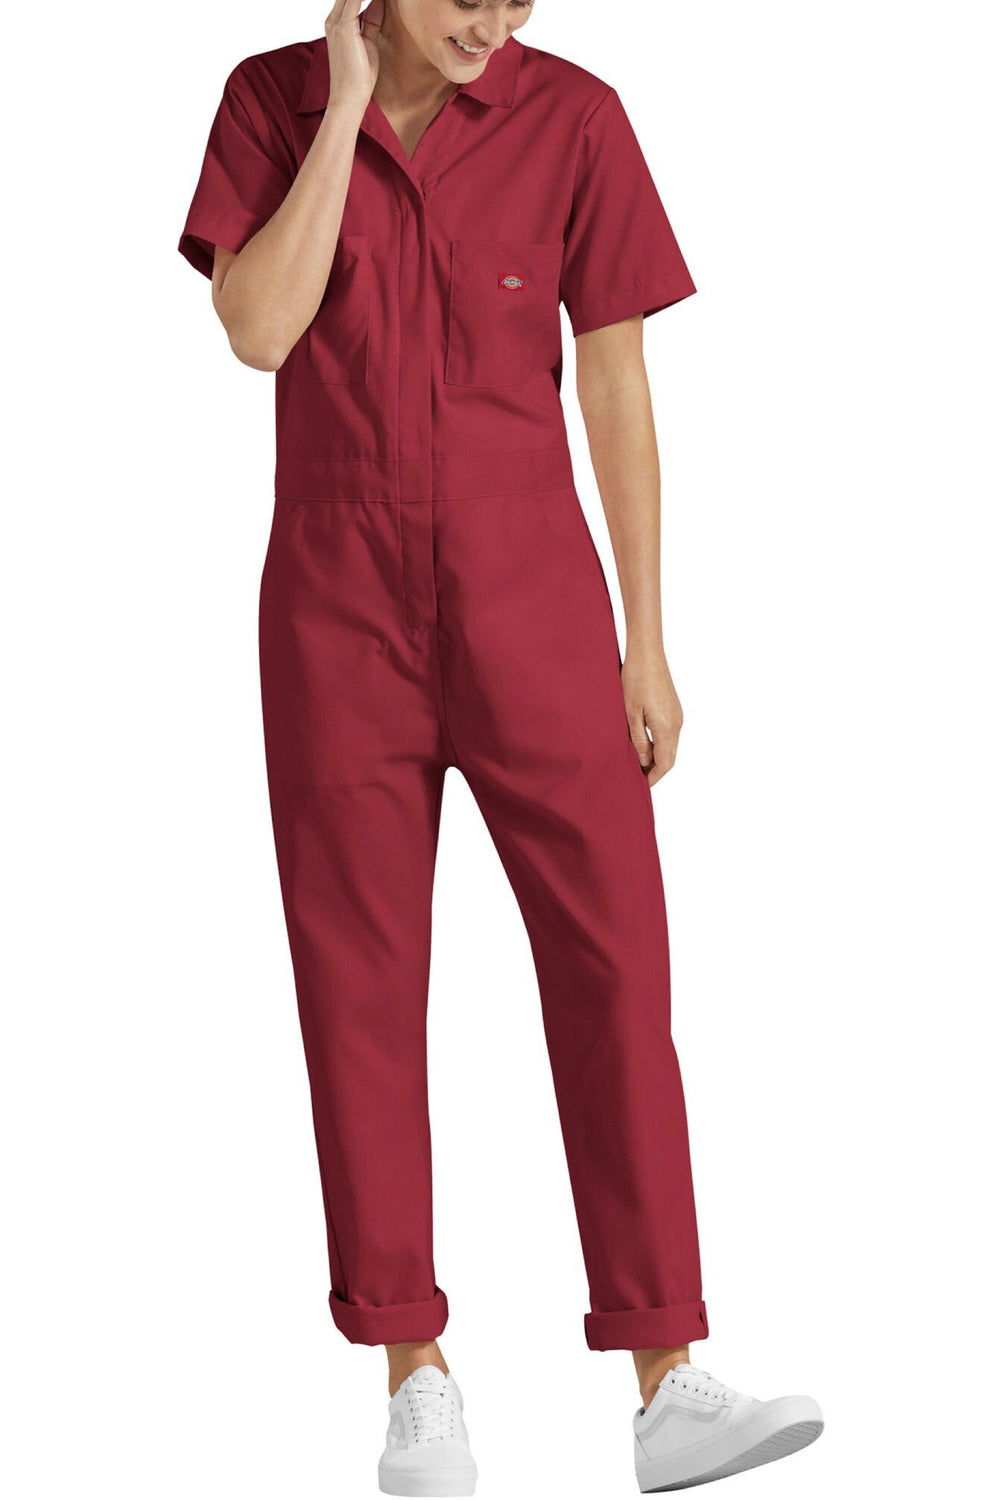 Short Sleeve Coveralls - Red